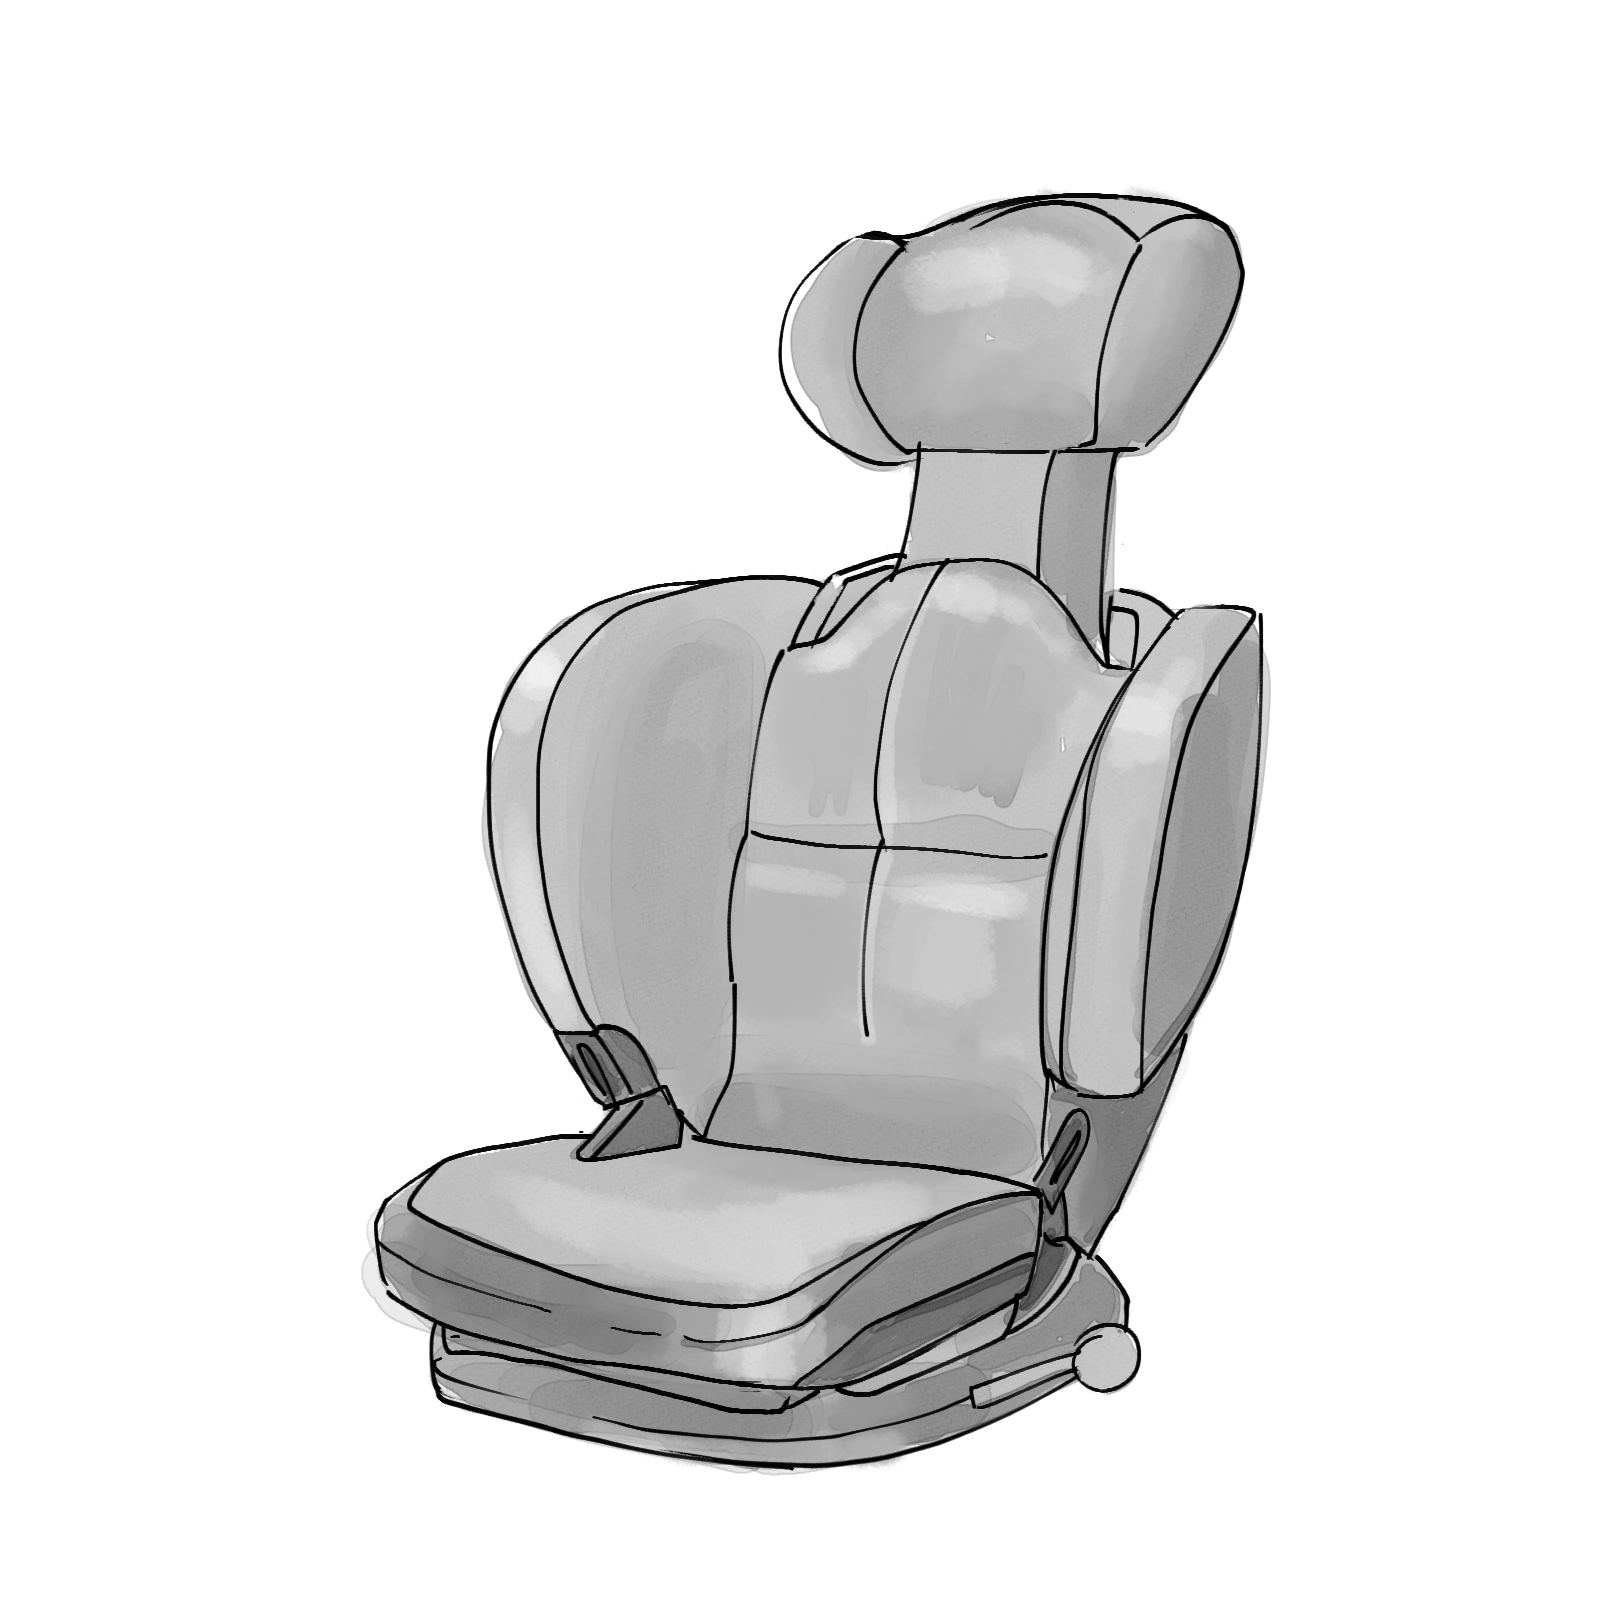  Product image 1 of the product “Child seat Agile ”